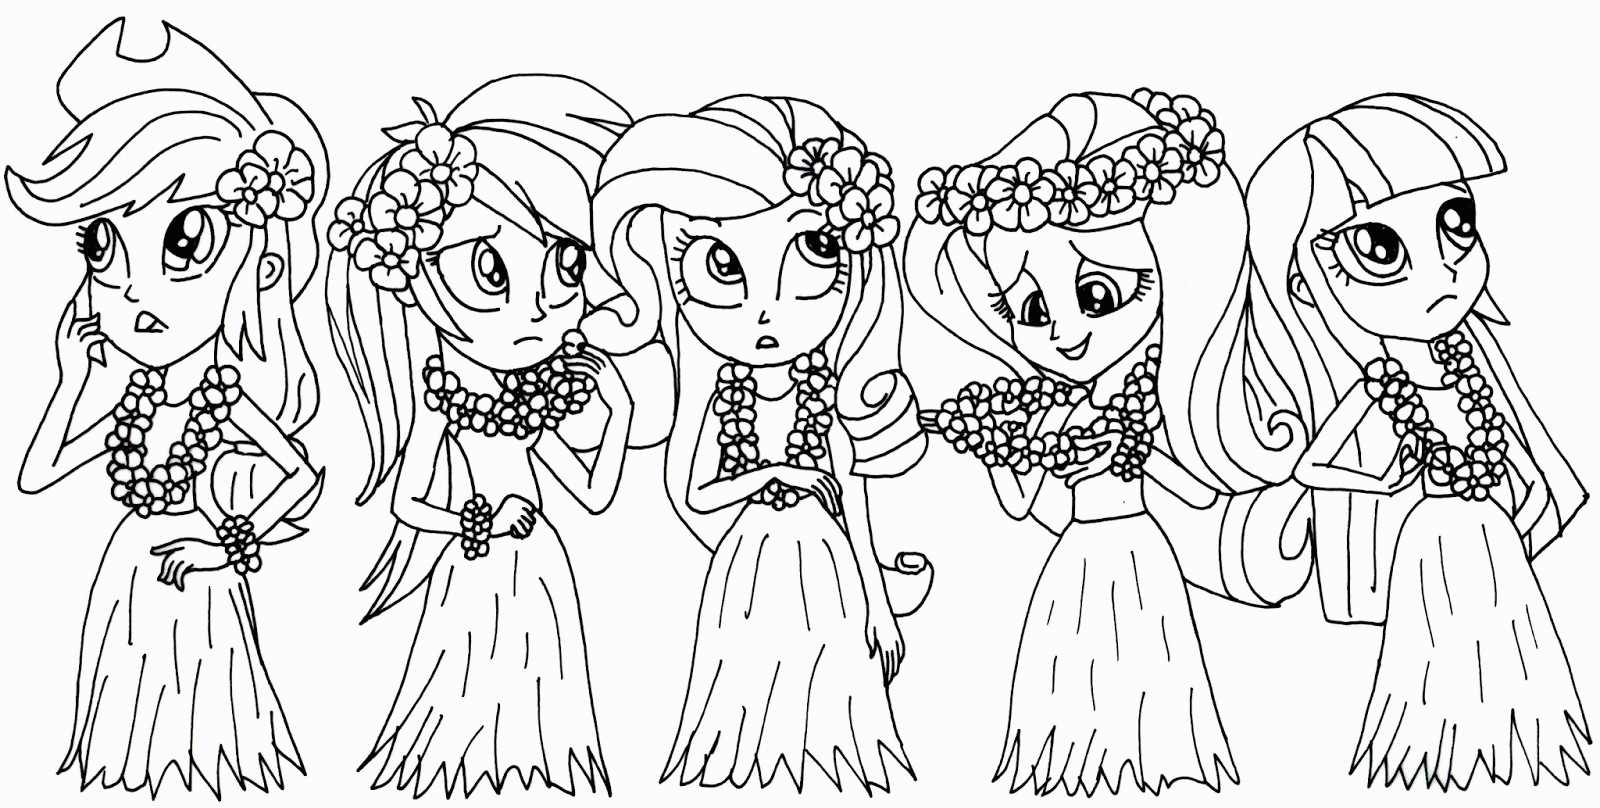 Free Equestria Girl Coloring Pages
 My Little Pony Coloring Pages Rainbow Dash Equestria Girls